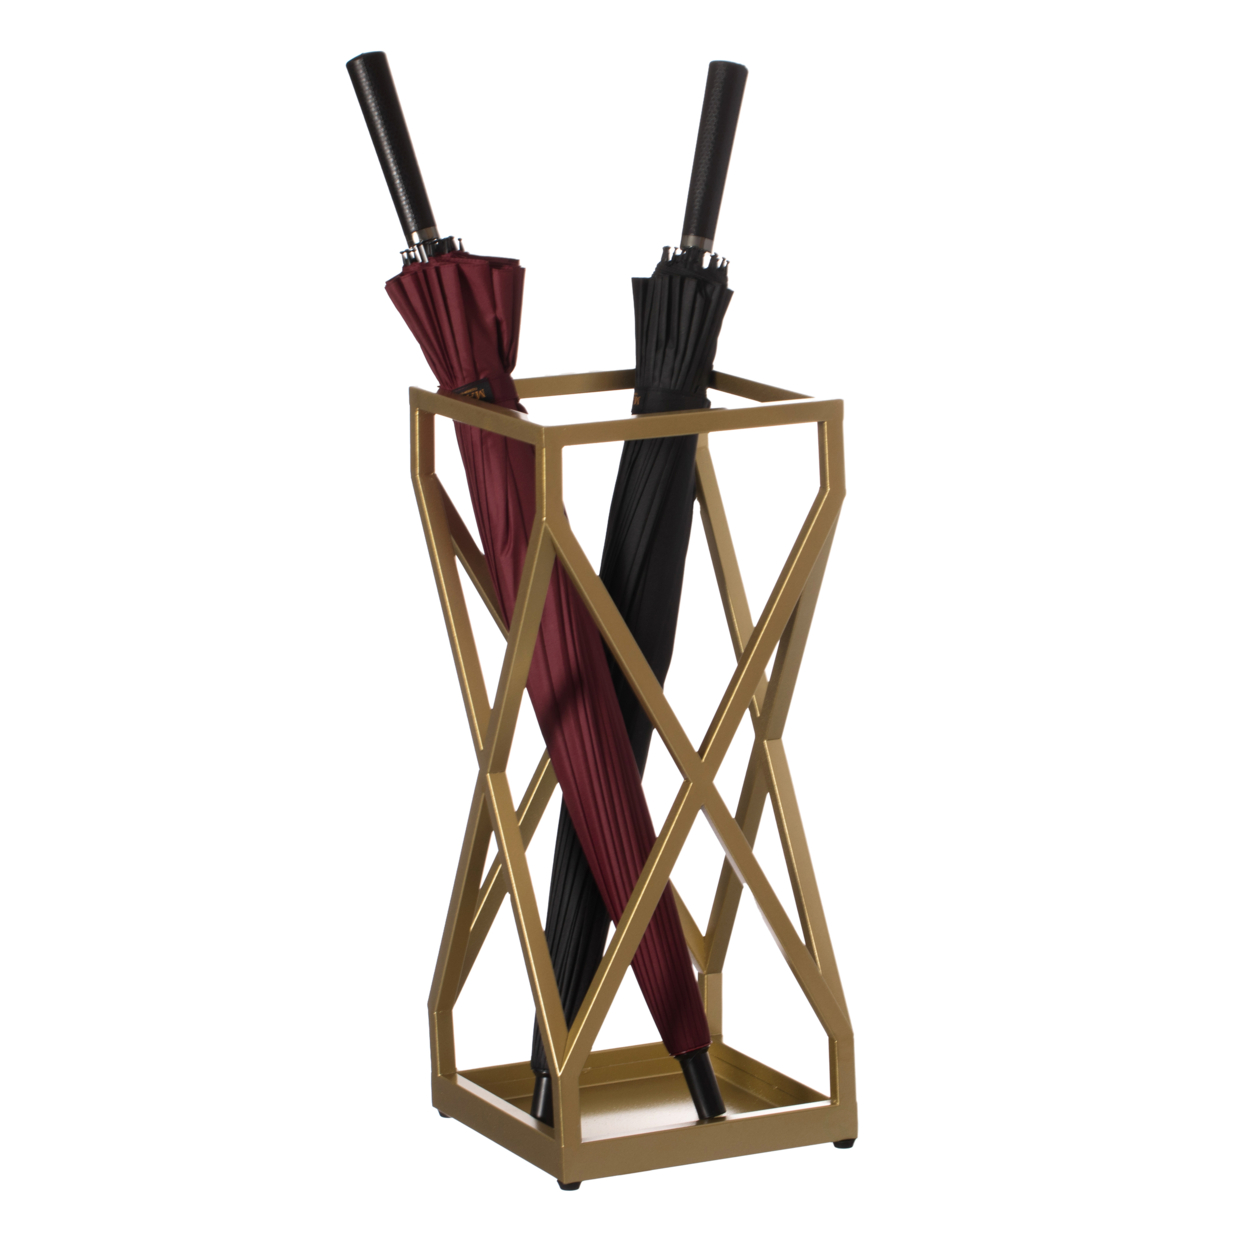 Decorative Gold Square X Design Umbrella Holder Stand For Indoor And Outdoor